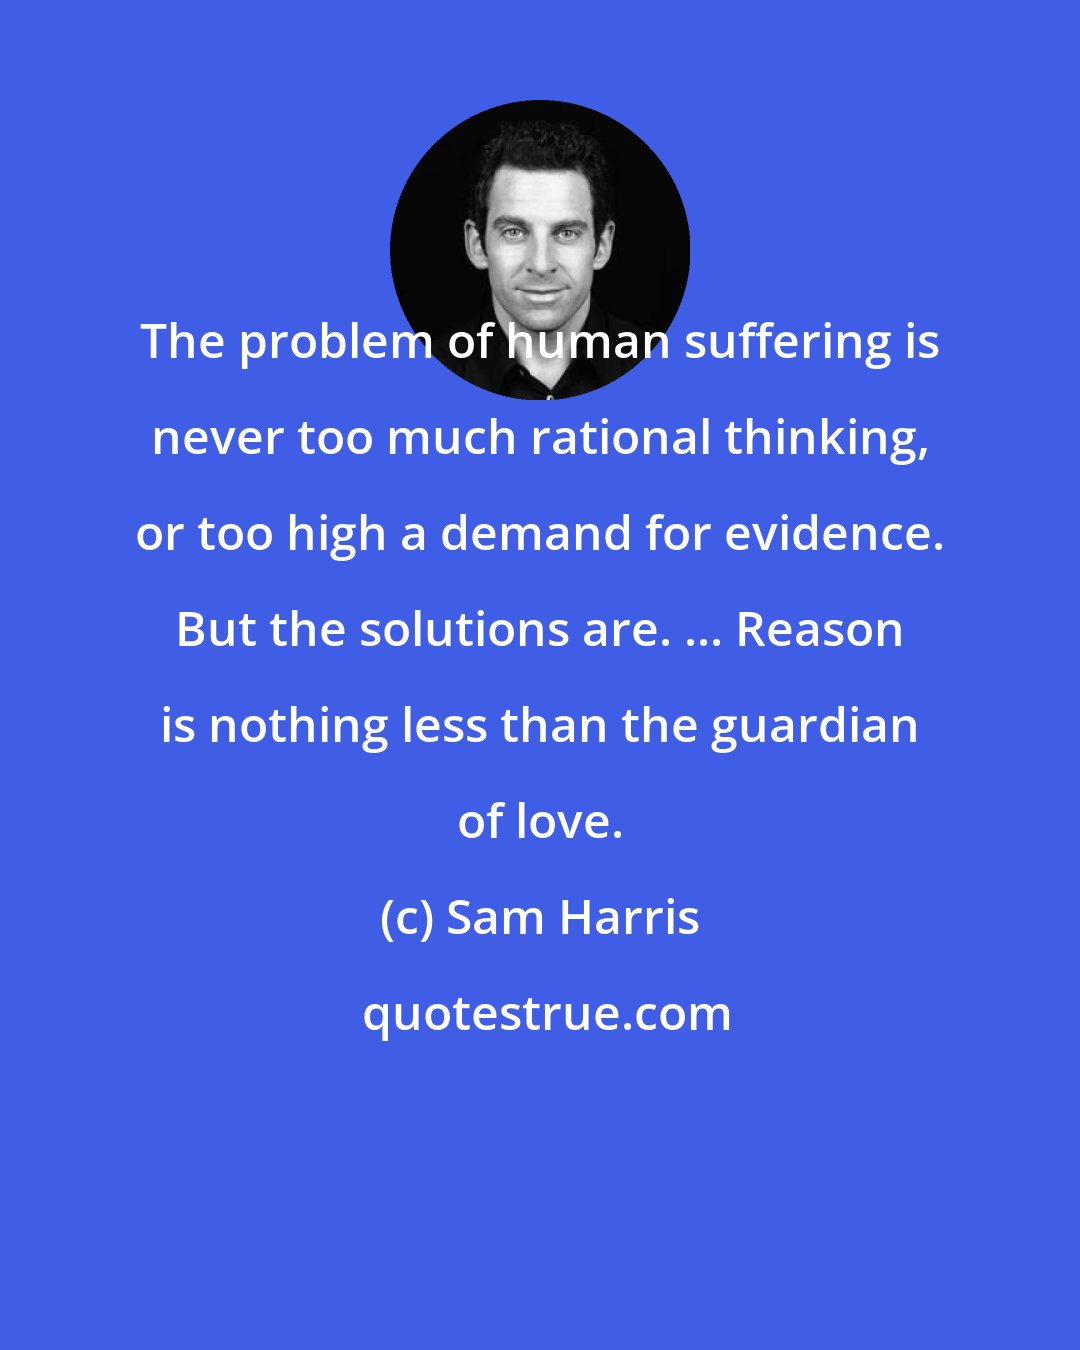 Sam Harris: The problem of human suffering is never too much rational thinking, or too high a demand for evidence. But the solutions are. ... Reason is nothing less than the guardian of love.